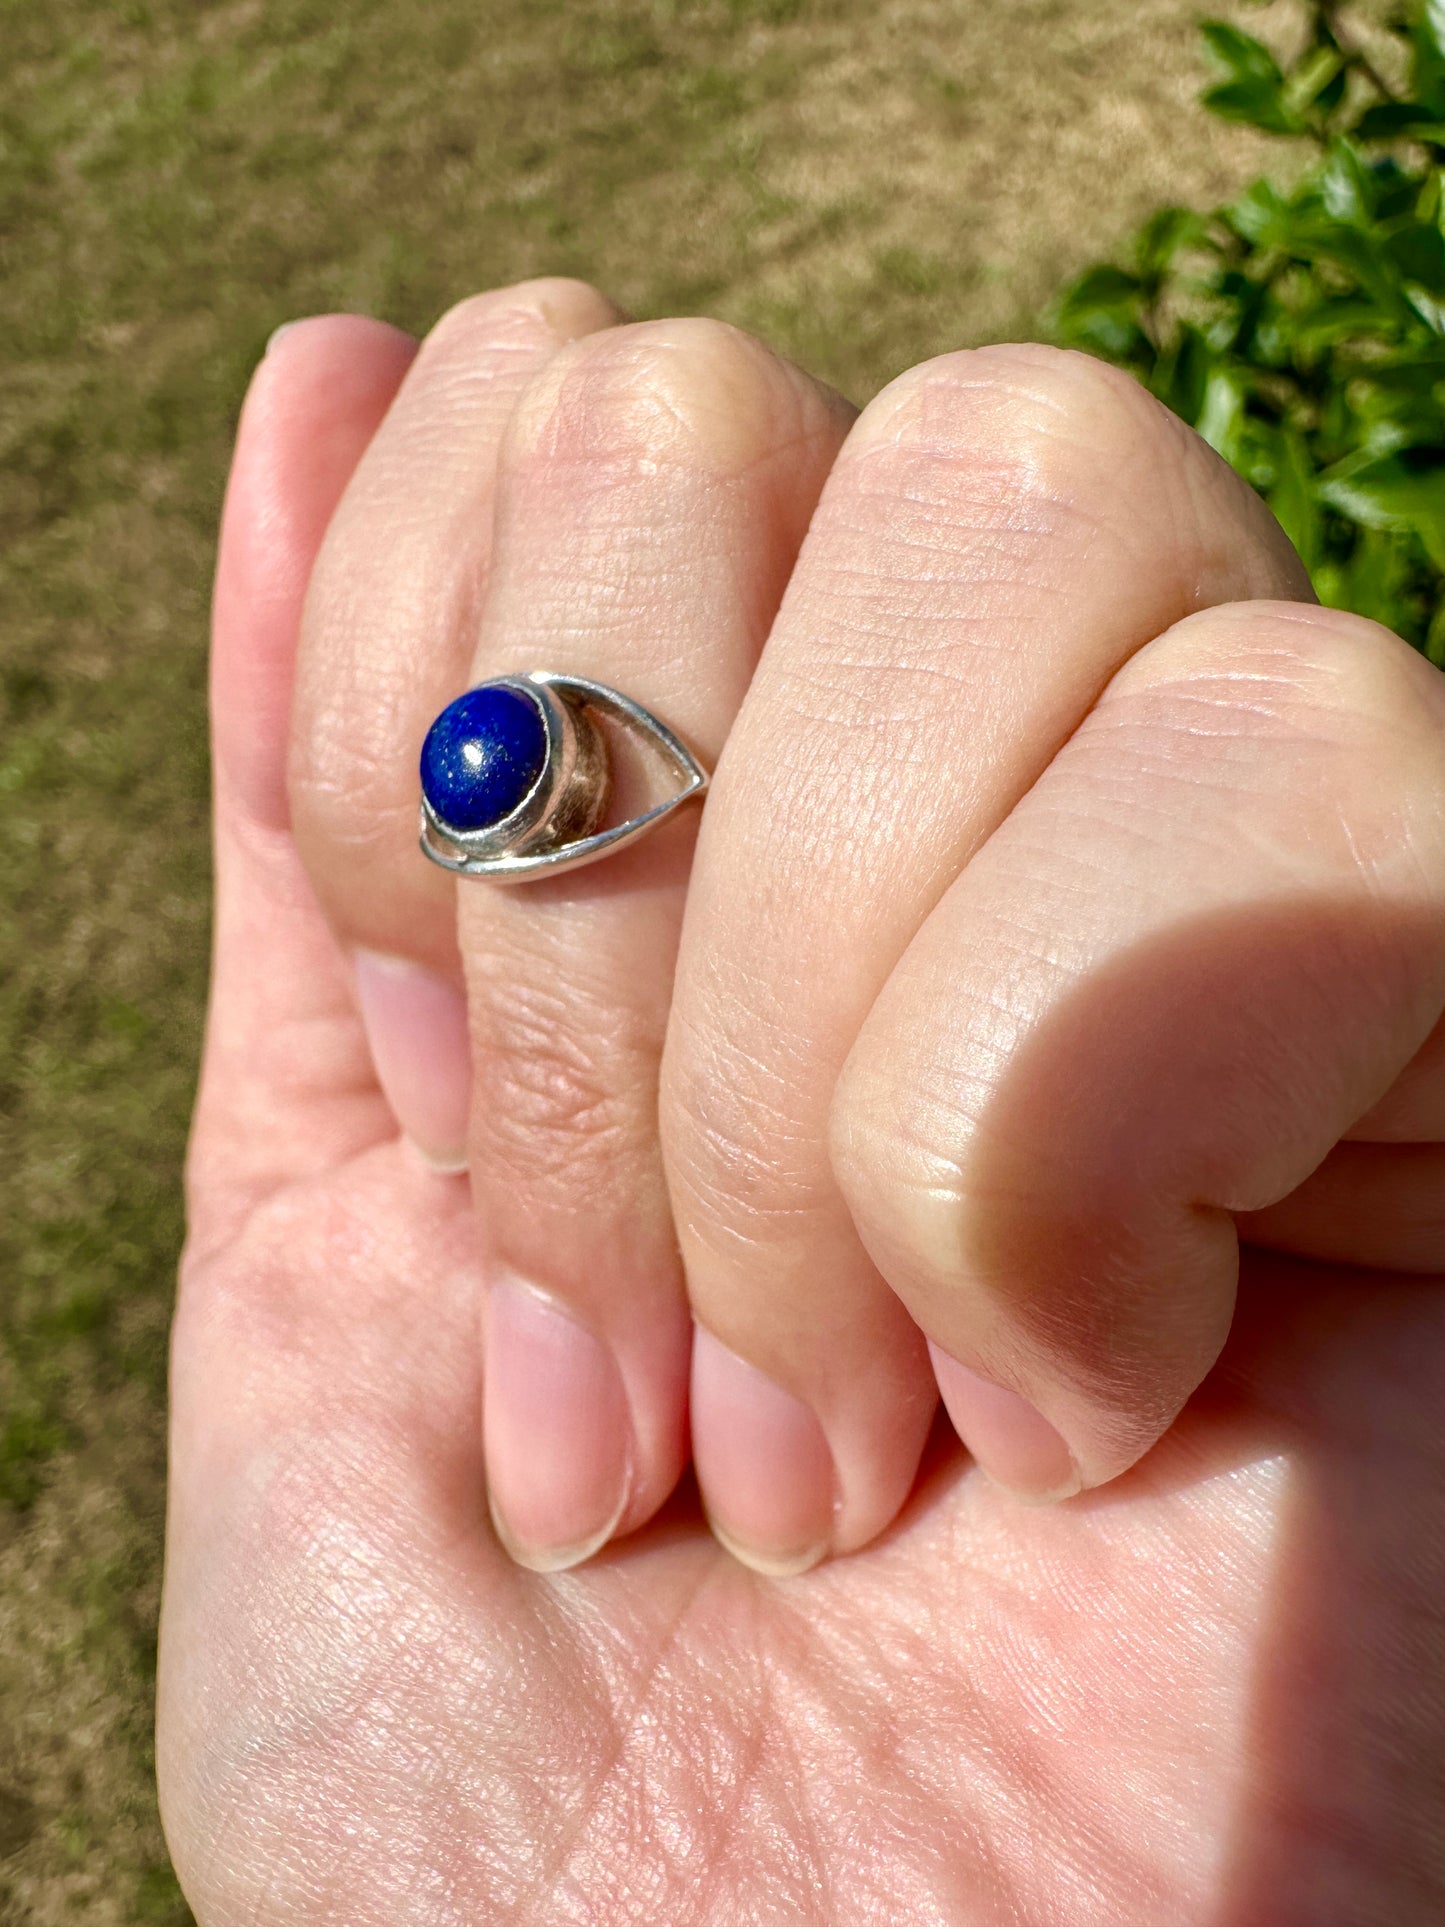 Handcrafted Lapis Lazuli Ring in Sterling Silver - Size 8 Elegant Blue Gemstone Jewelry - Unique Artisan Crafted Ring - Perfect Gift for Her